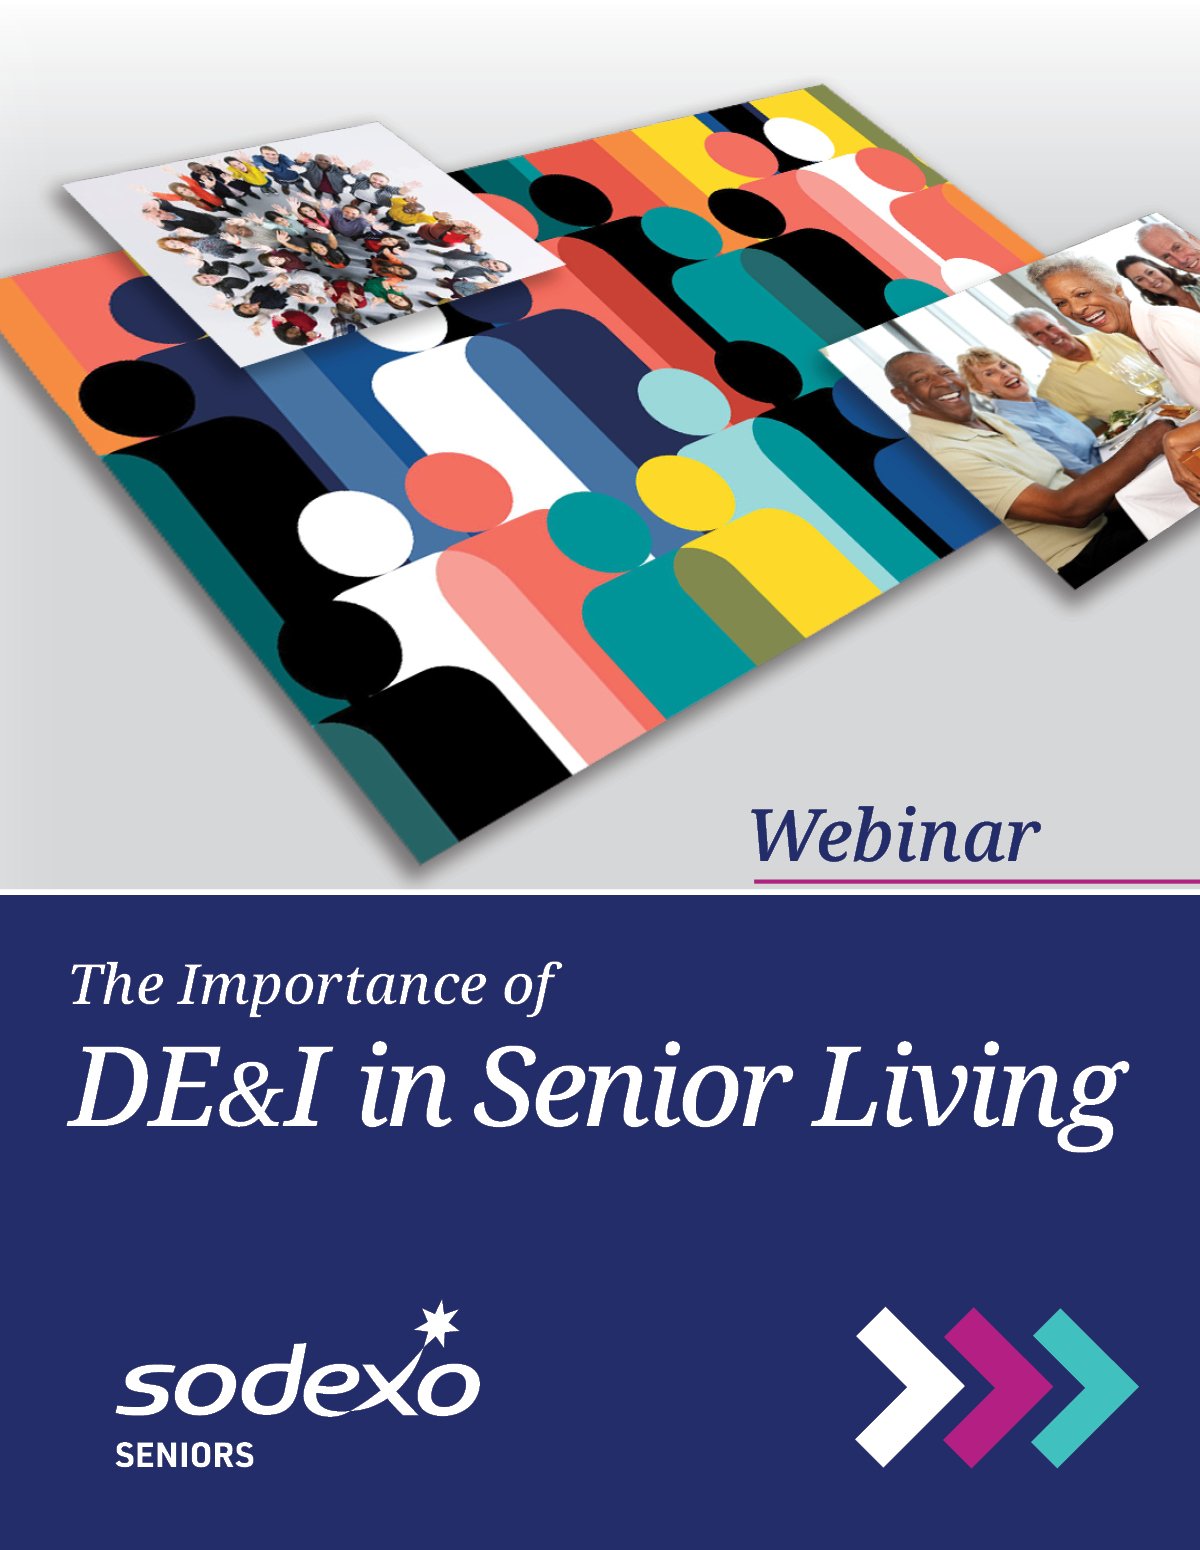 WEBINAR - Diversity, Equity & Inclusion and Its Importance in Senior Living